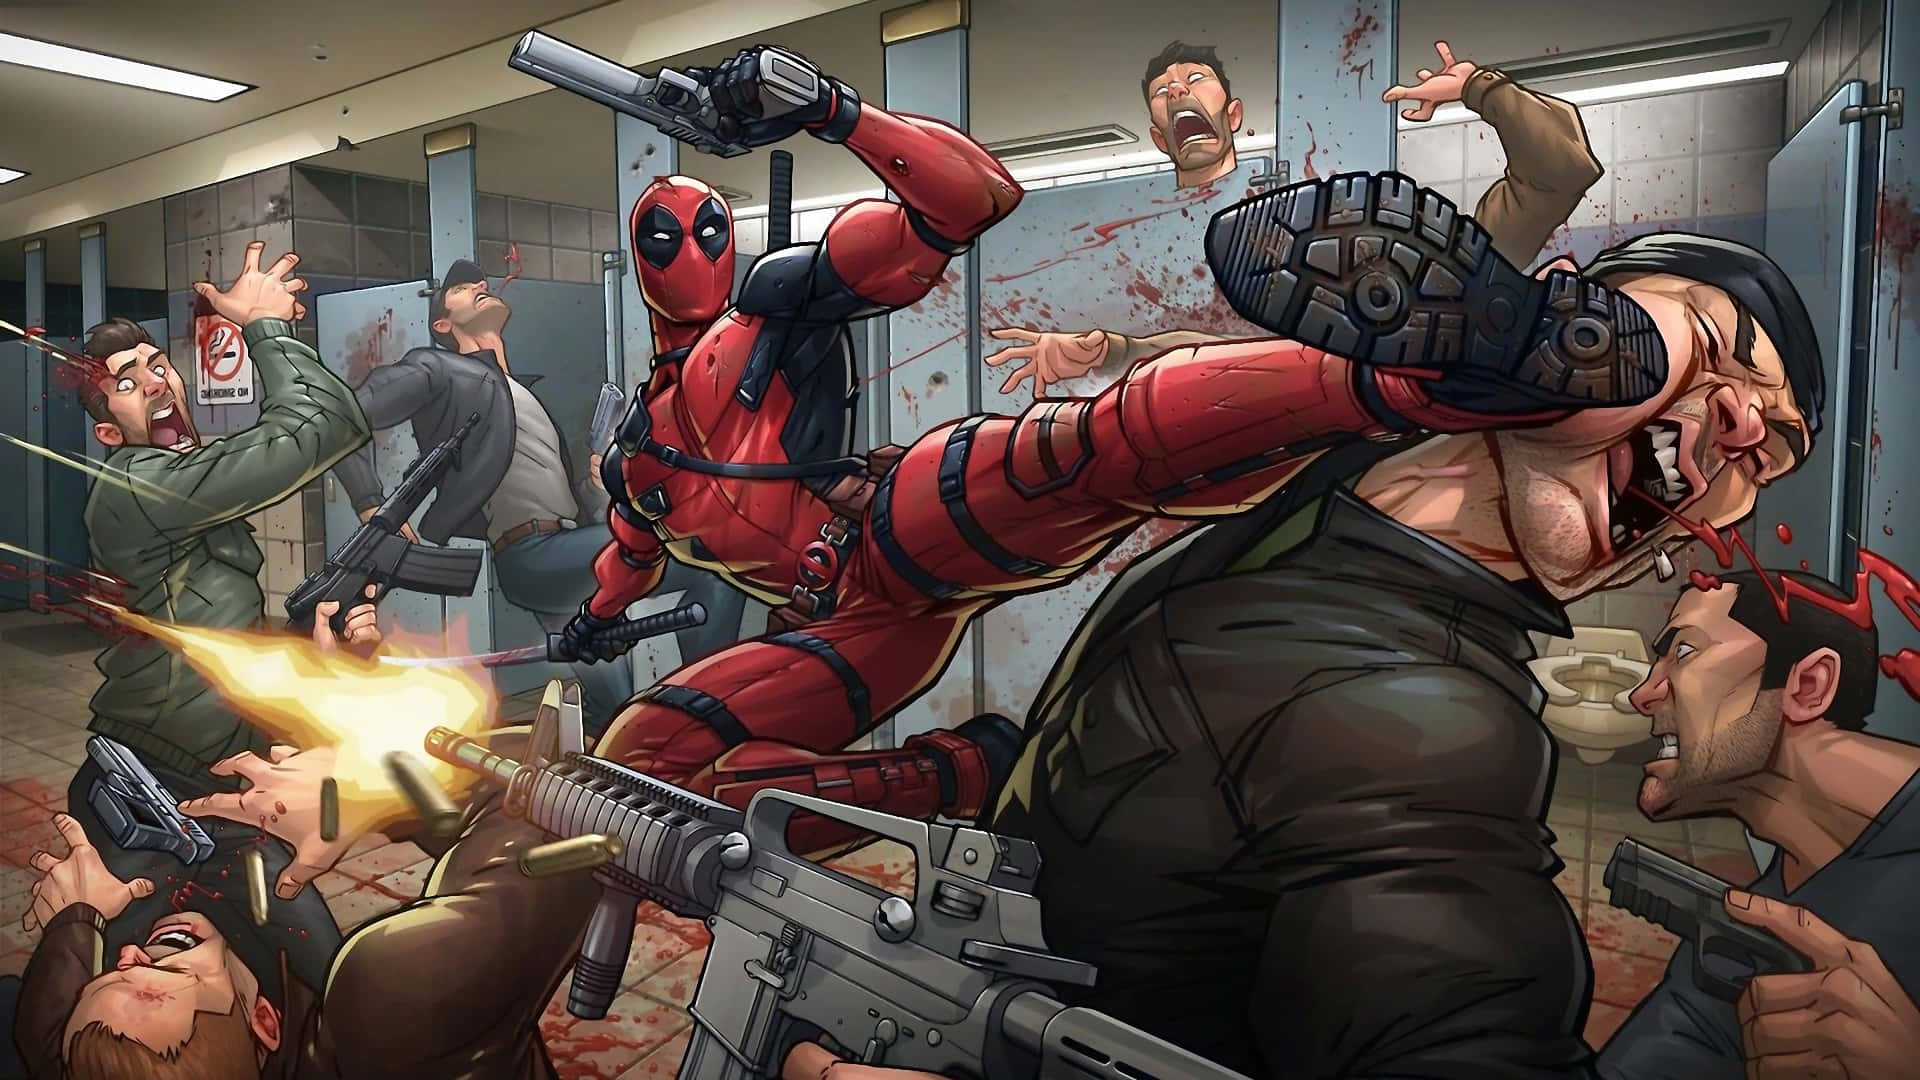 Deadpool Breaks The Fourth Wall — Intense Close-up